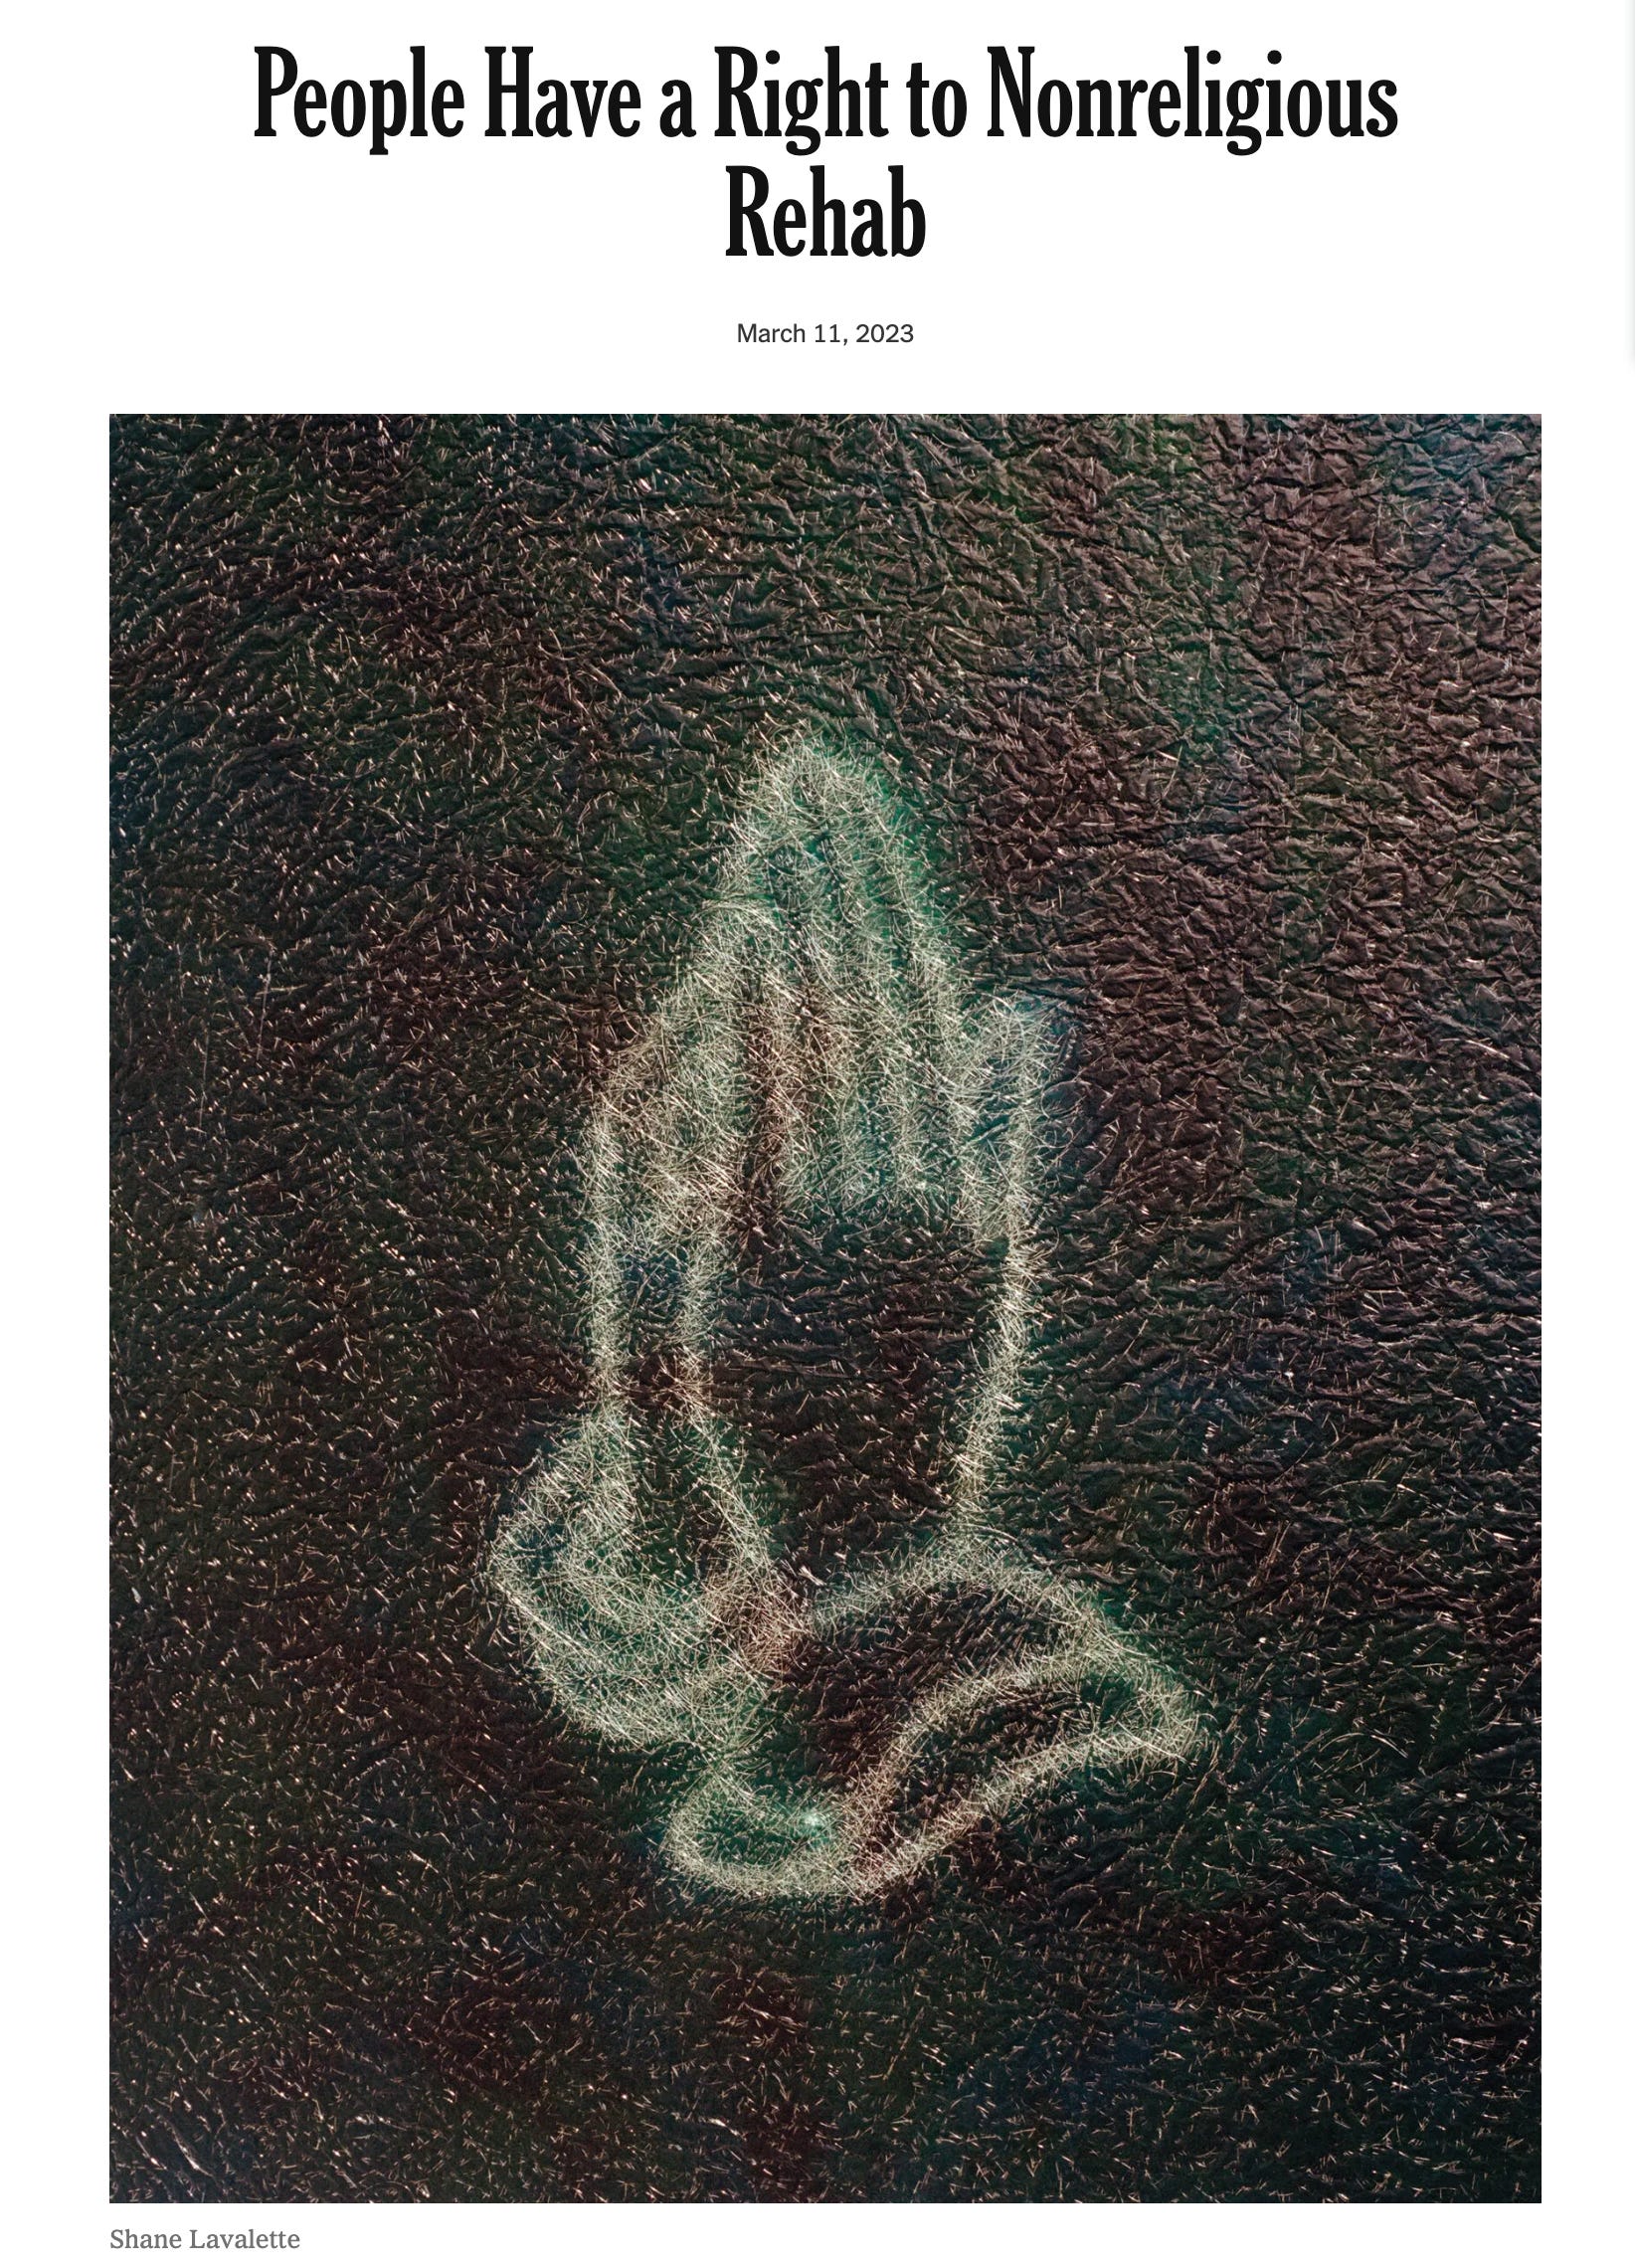 New York Times article titled "People have a right to non-religious rehab", with an image of praying hands in chalk on a black background, hands illuminated in the colour